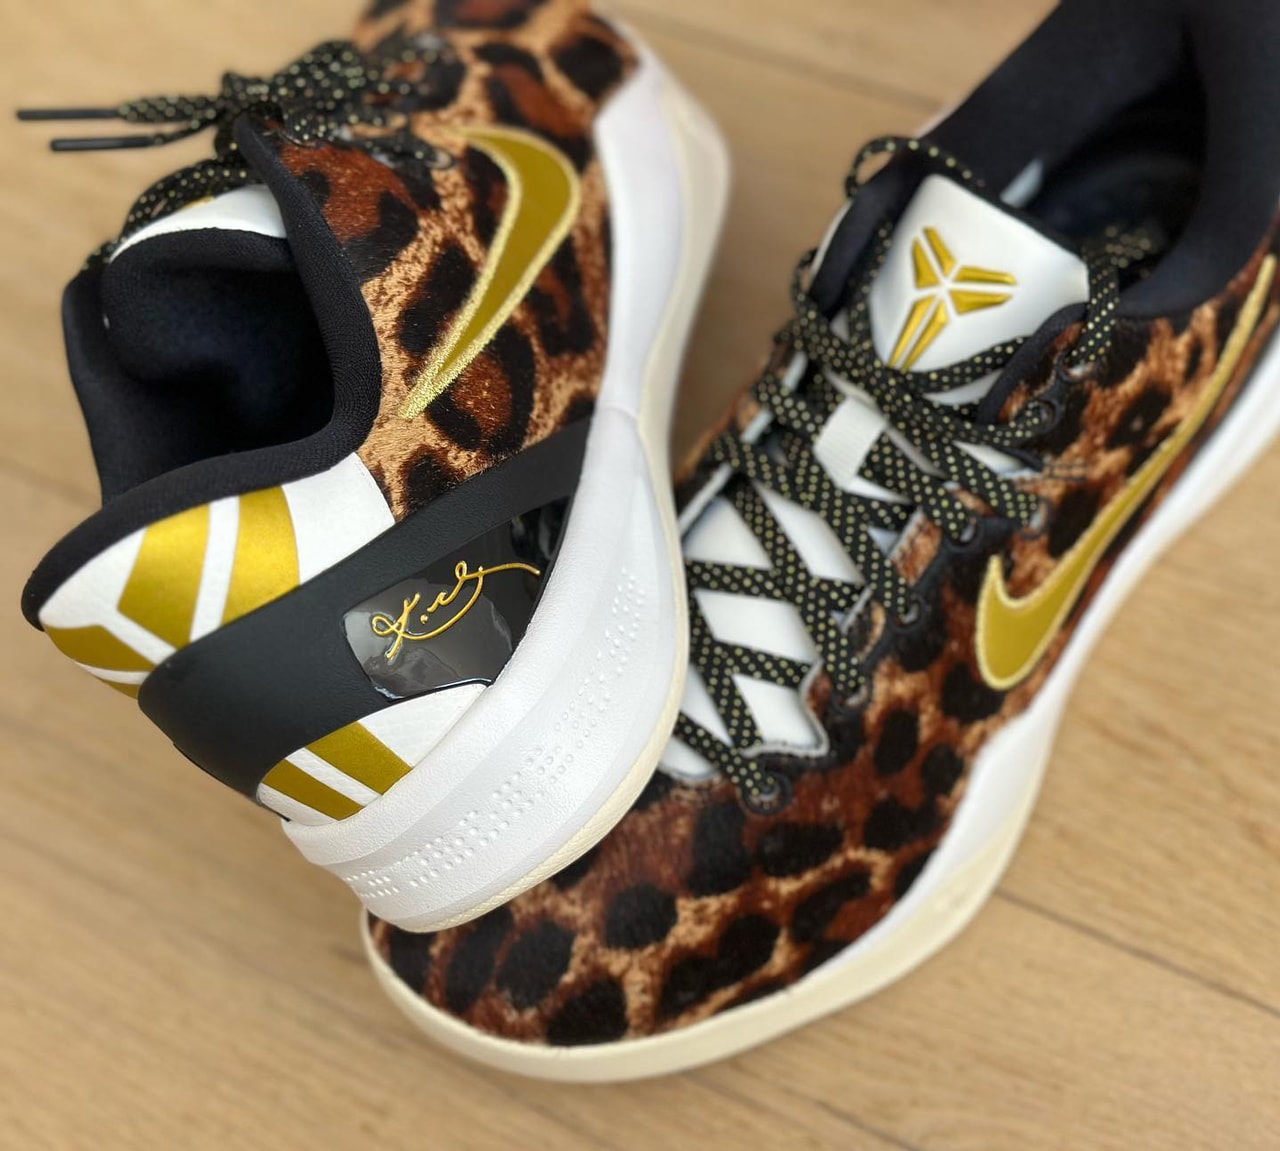 vanessa bryant nike kobe 8 protro sneaker pe player edition leopard official release date info photos price store list buying guide